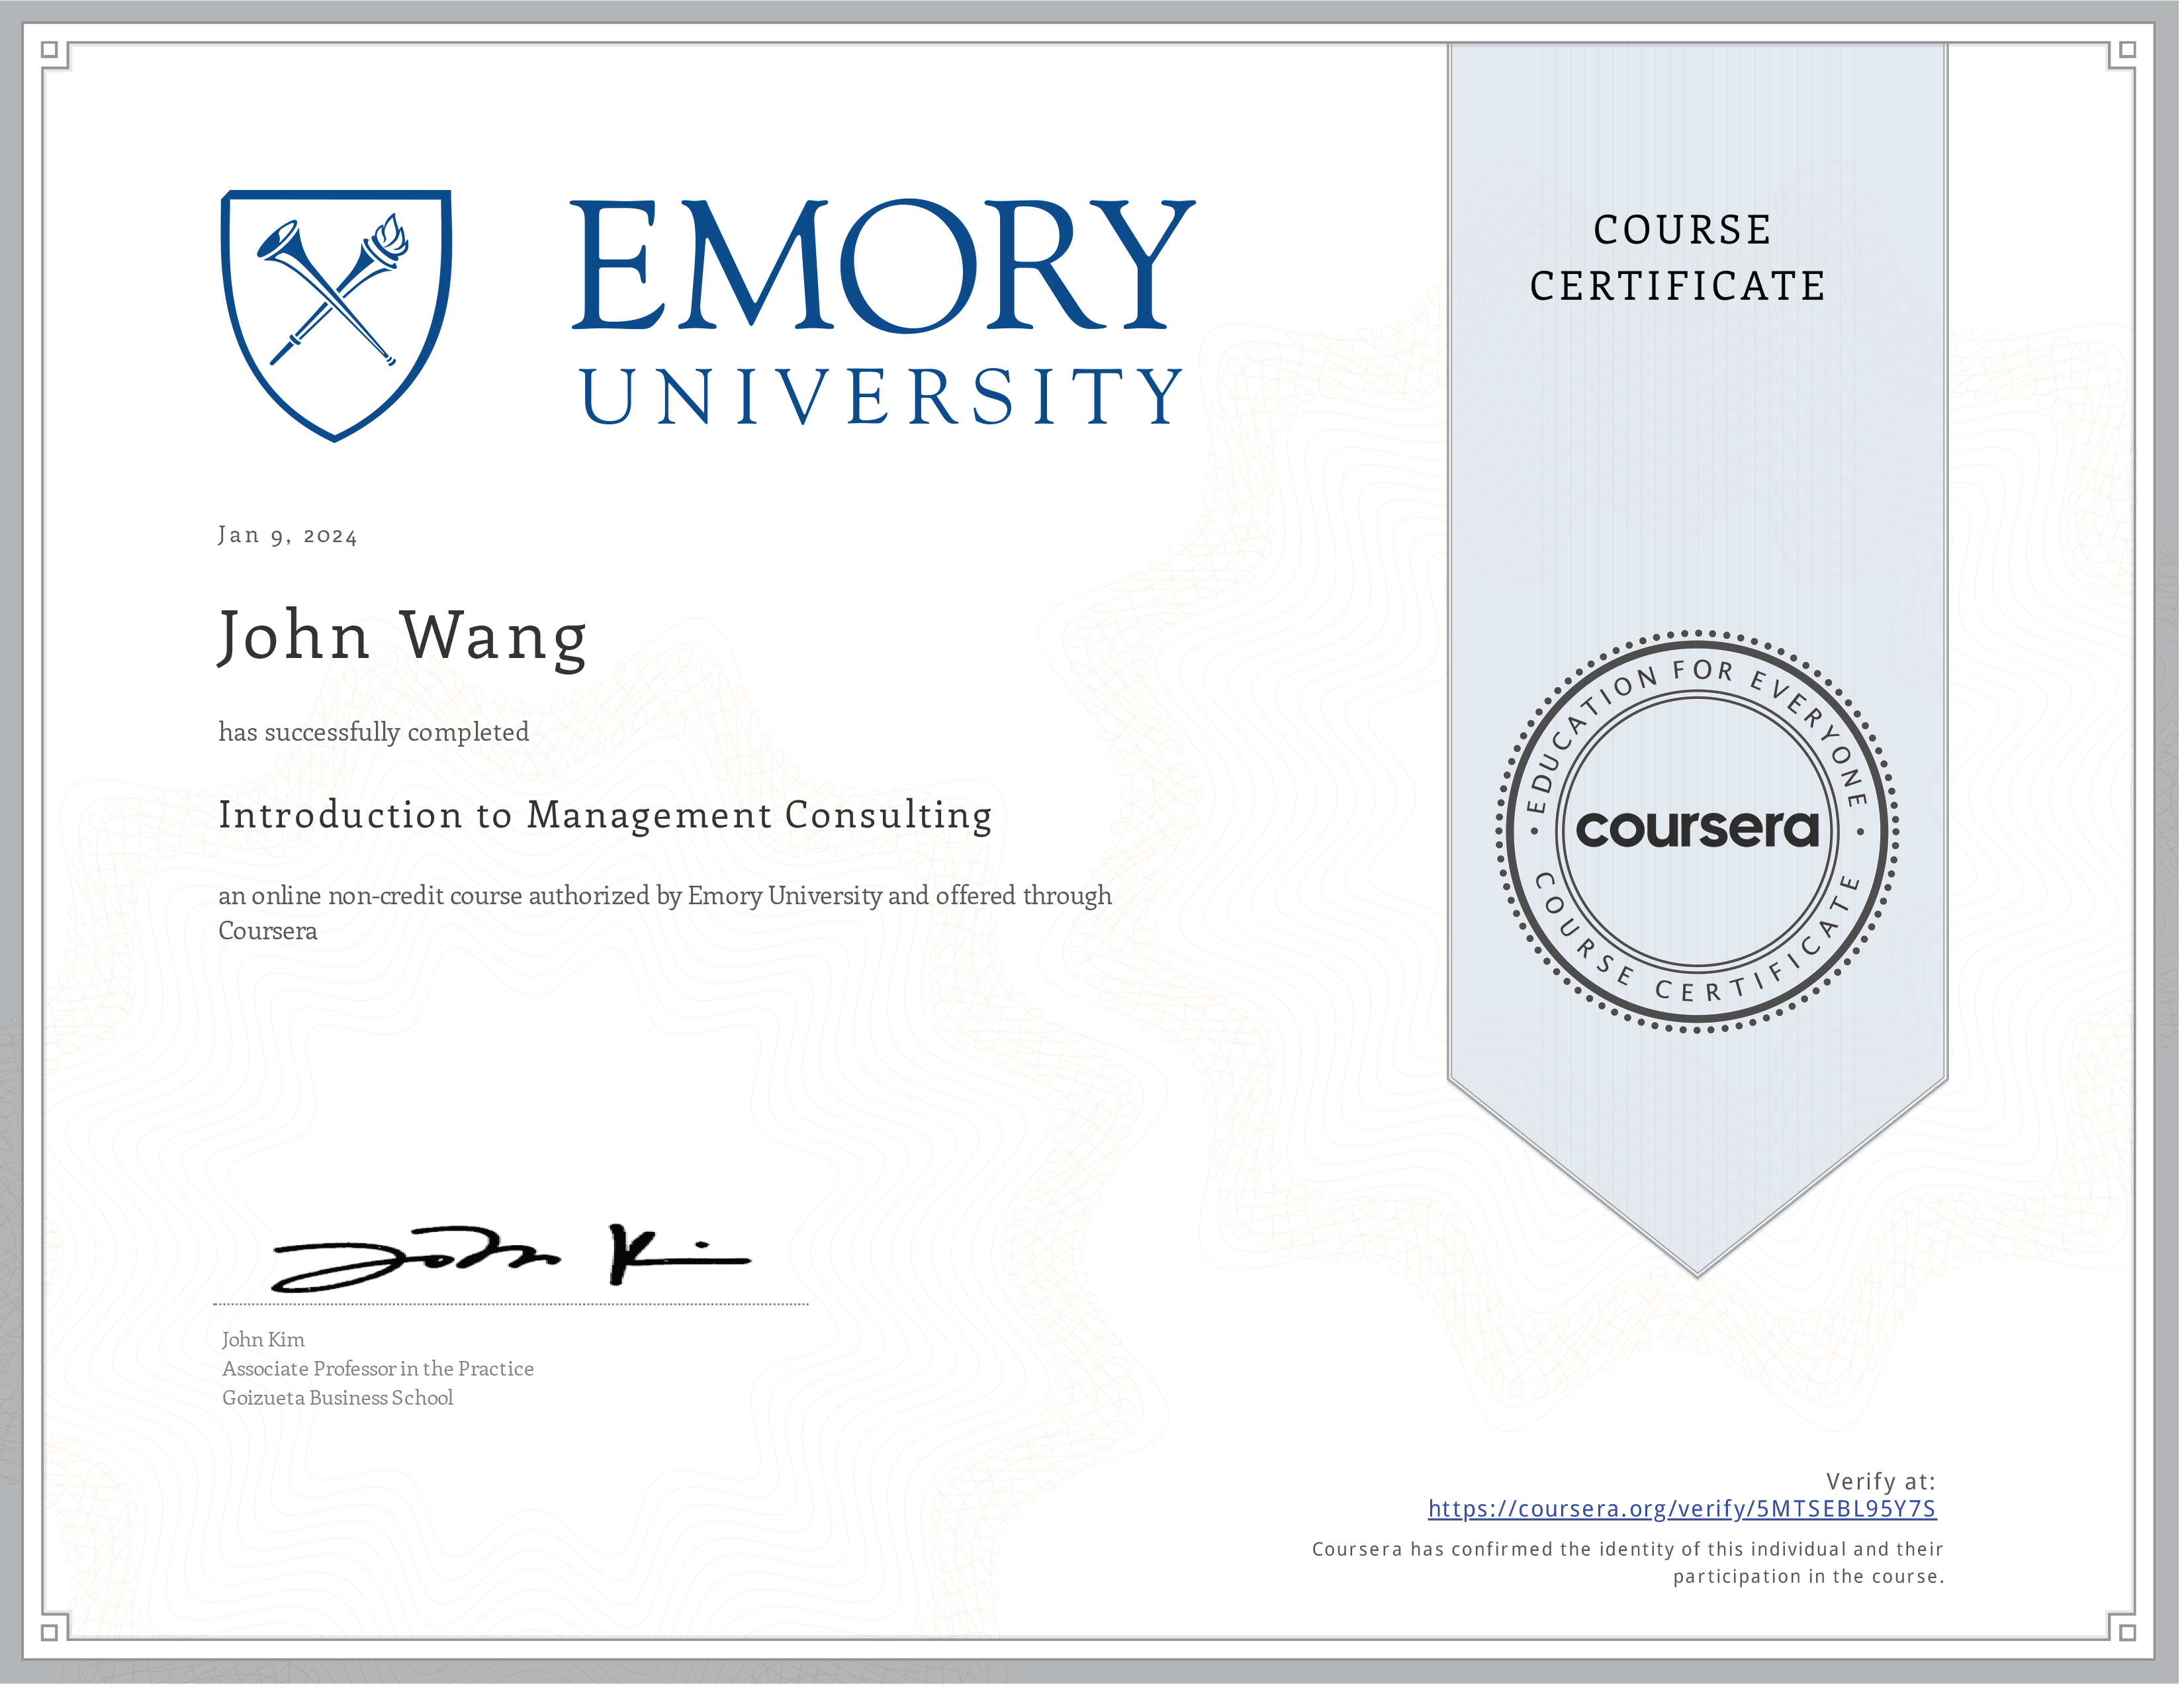 John's Introduction to Management Consulting from Emory University by John Kim